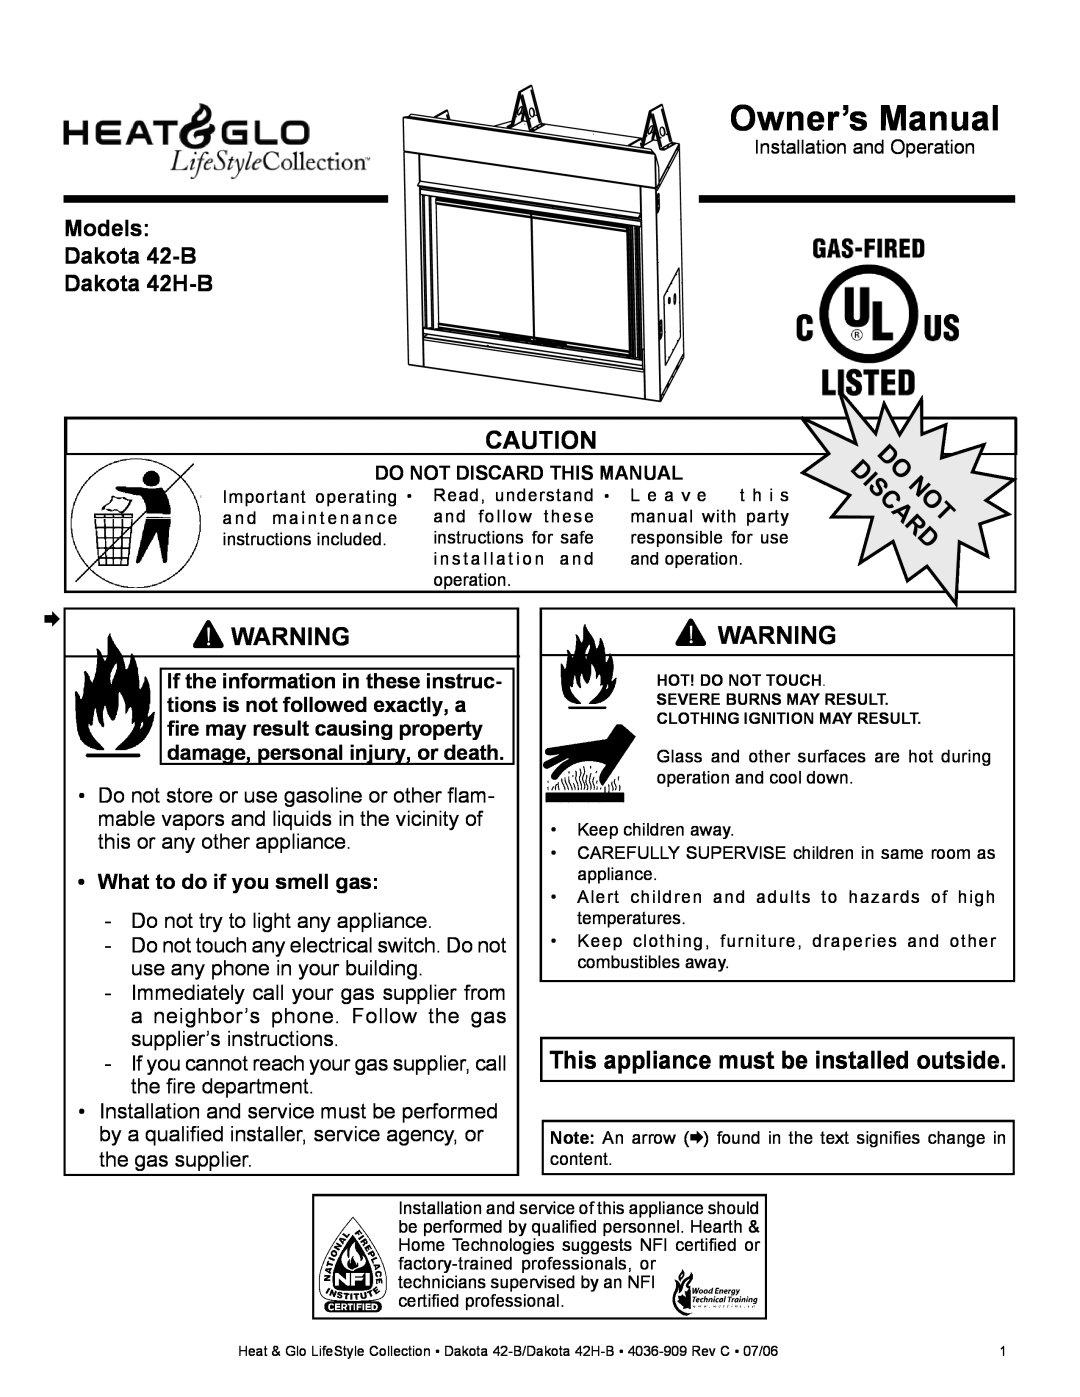 Heat & Glo LifeStyle Dakota 42-B owner manual This appliance must be installed outside, What to do if you smell gas 